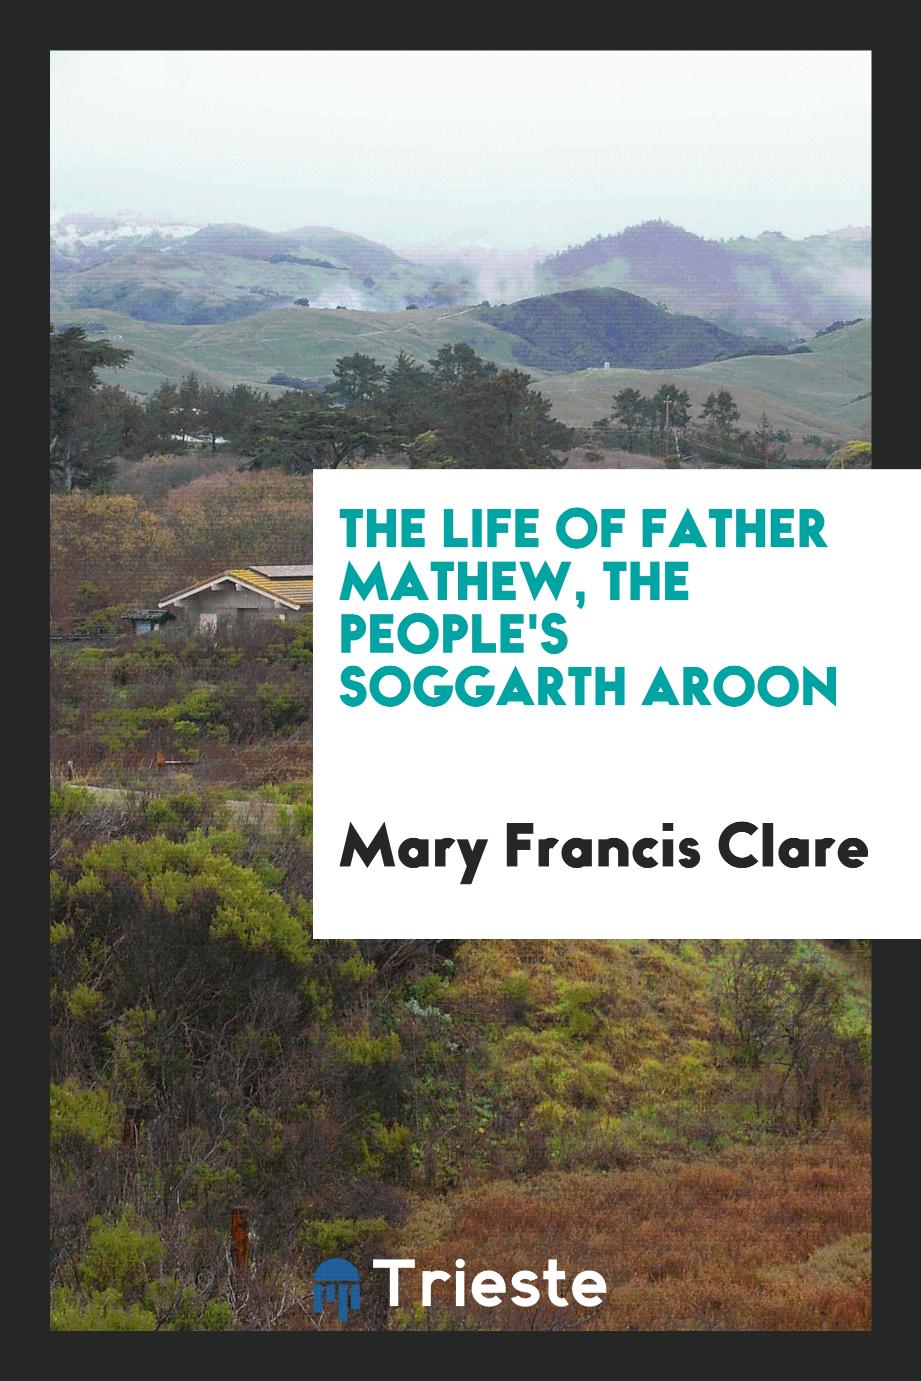 The life of Father Mathew, the people's Soggarth Aroon